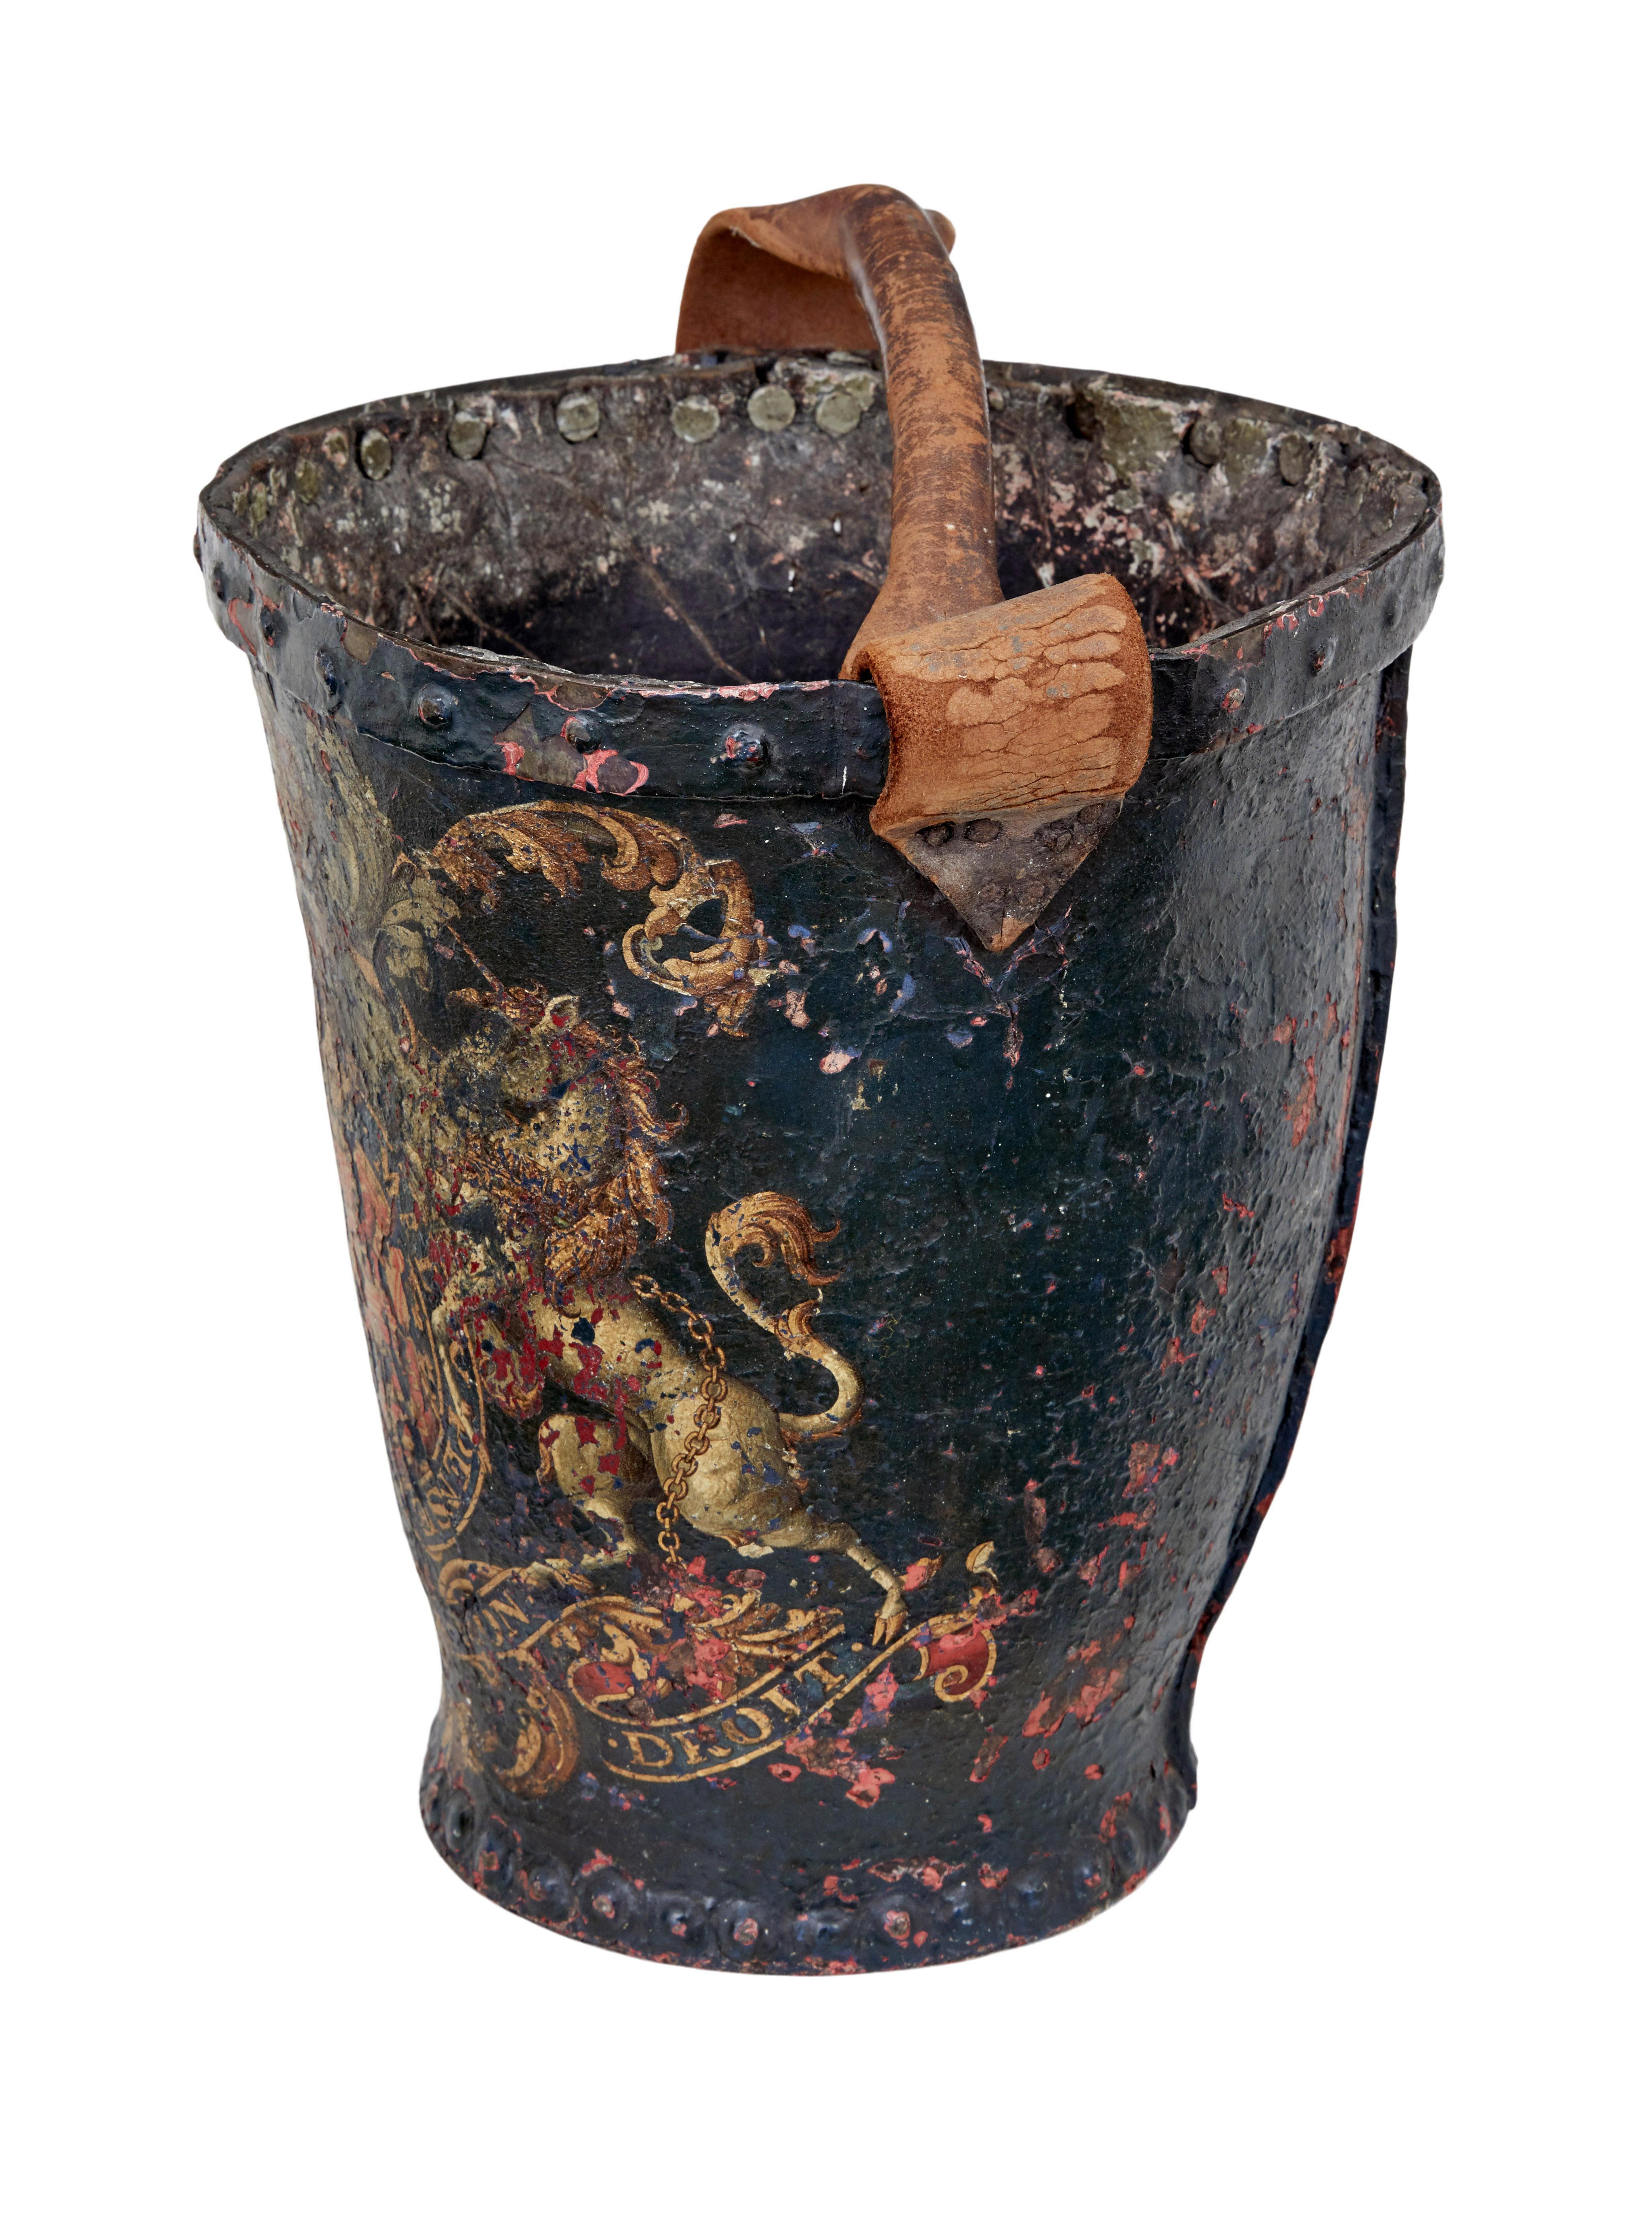 Late 18th century George III leather hand painted fire bucket circa 1780.

Good quality leather fire bucket.  Armorial decorated, inscribed honi soit-oui mal y pense, which means shamed be whoever things evil of it, which was used by the british